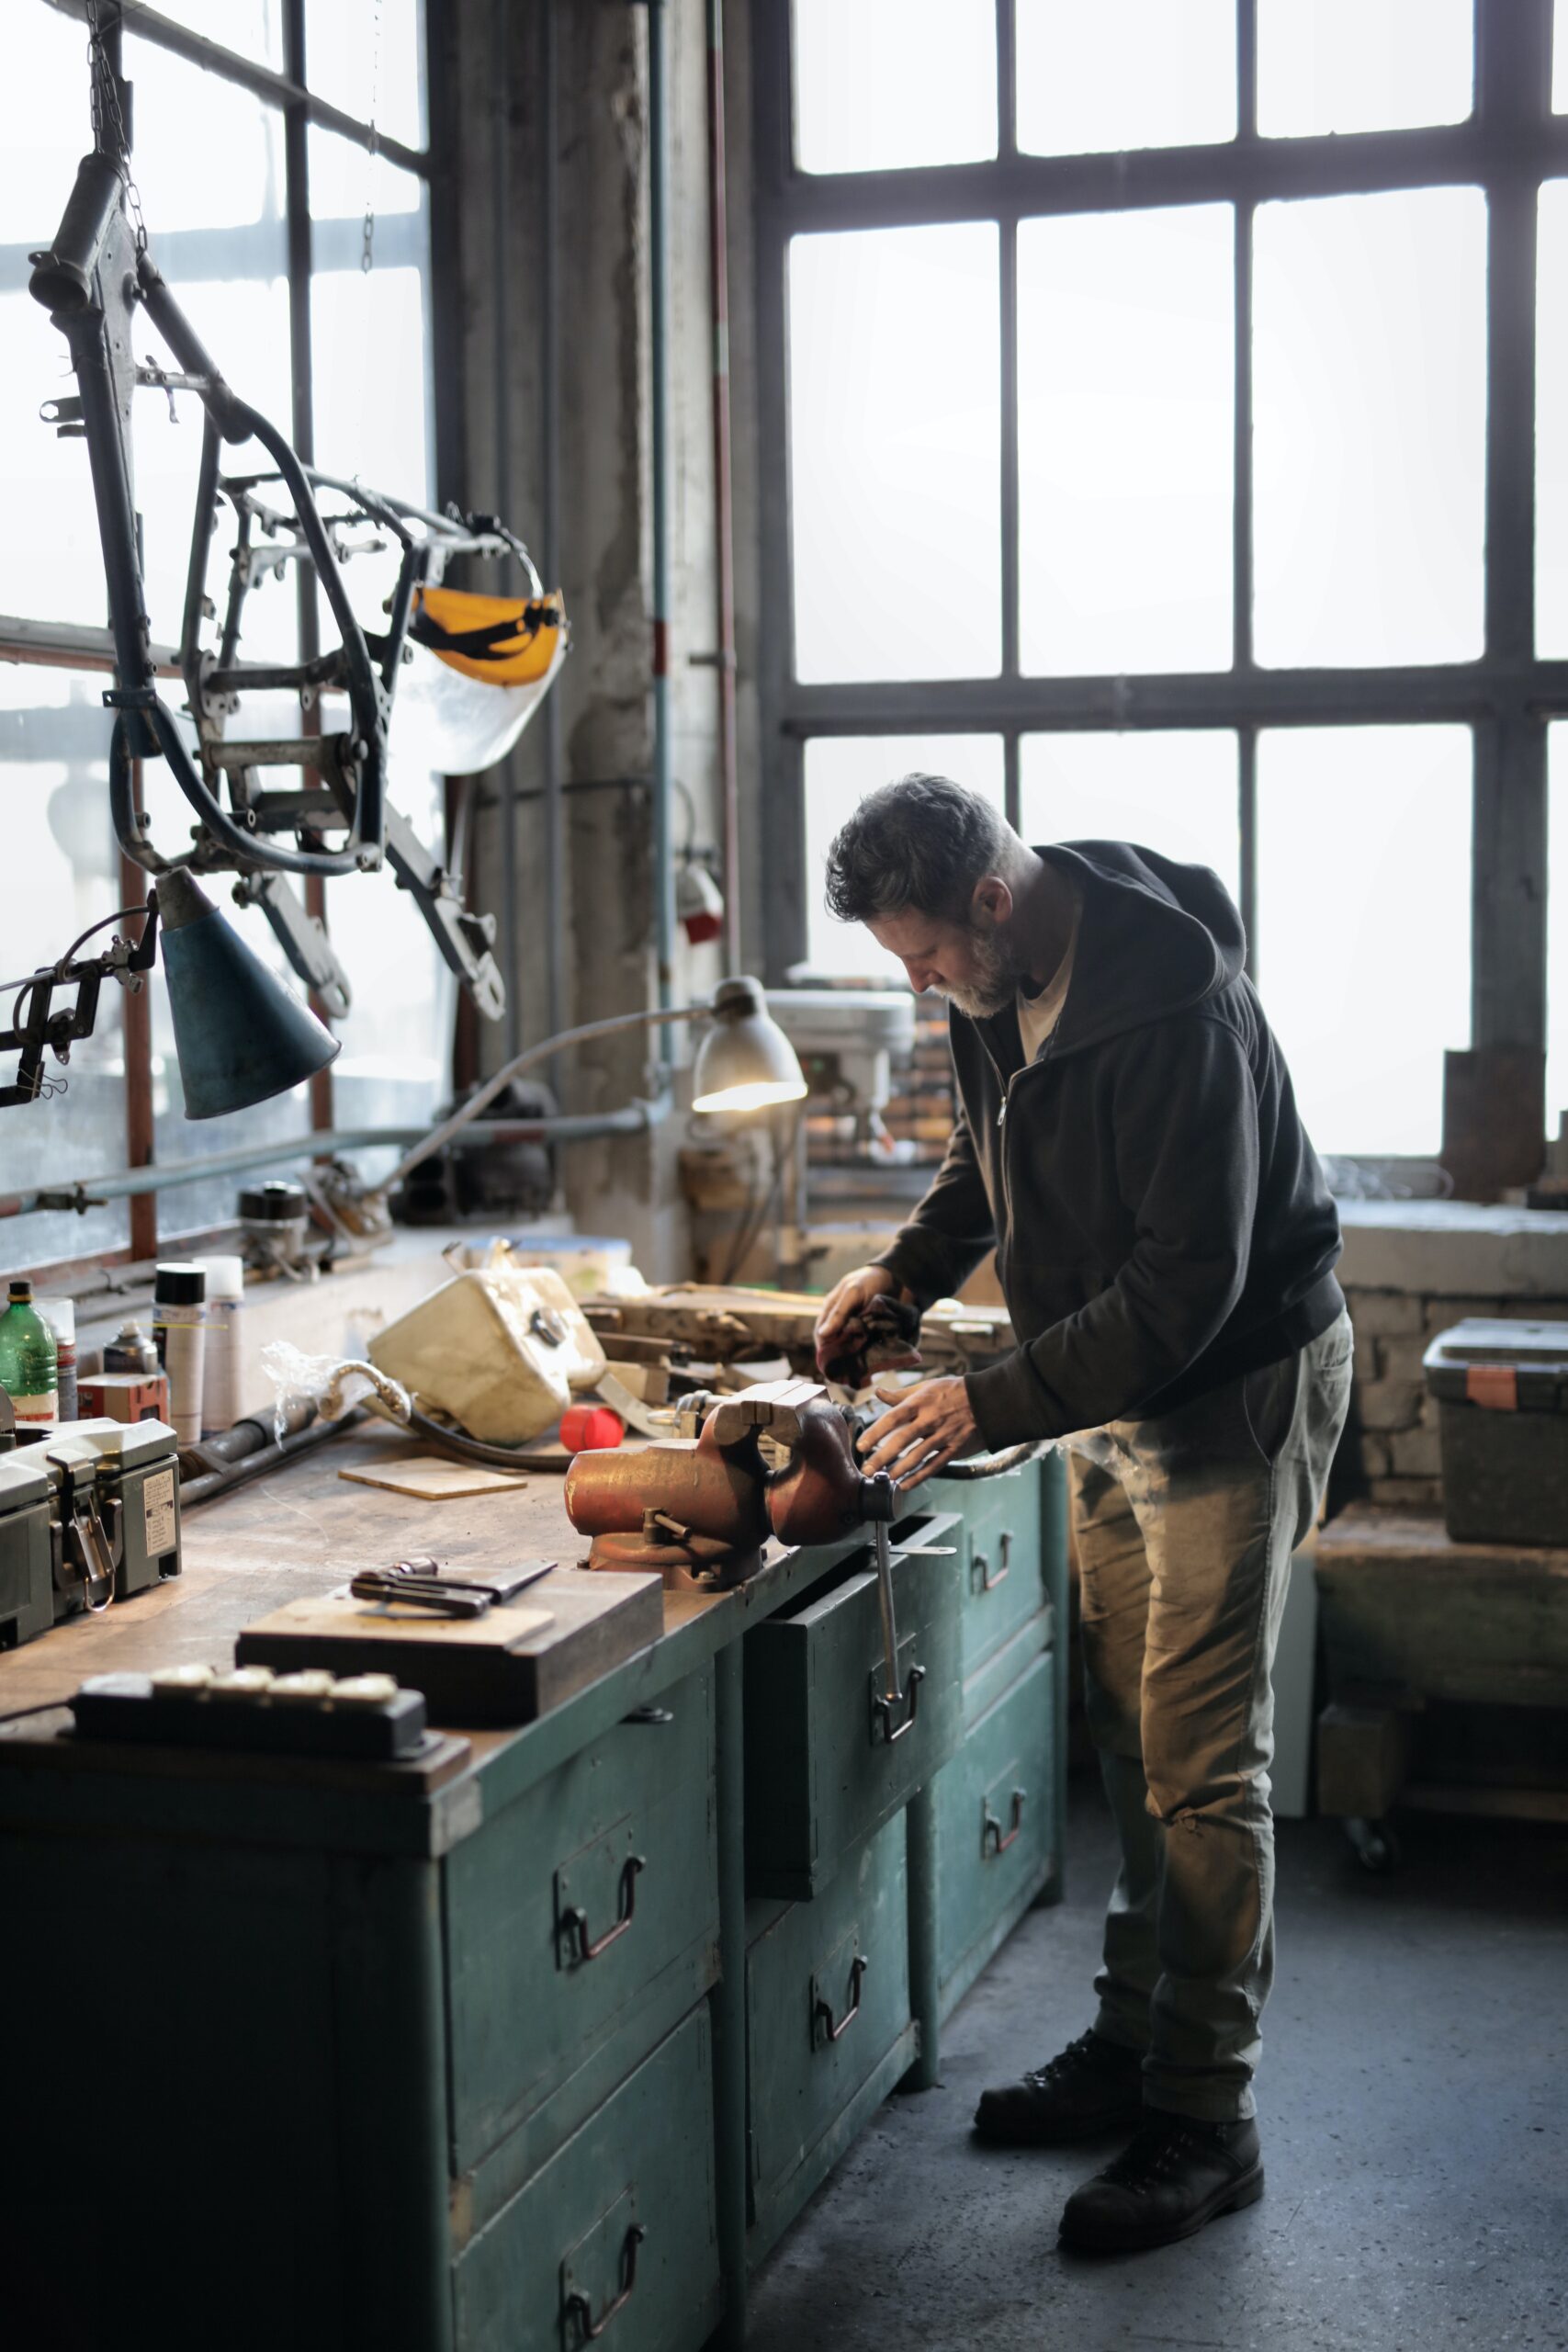 Man working in his workshop with various tools around him.